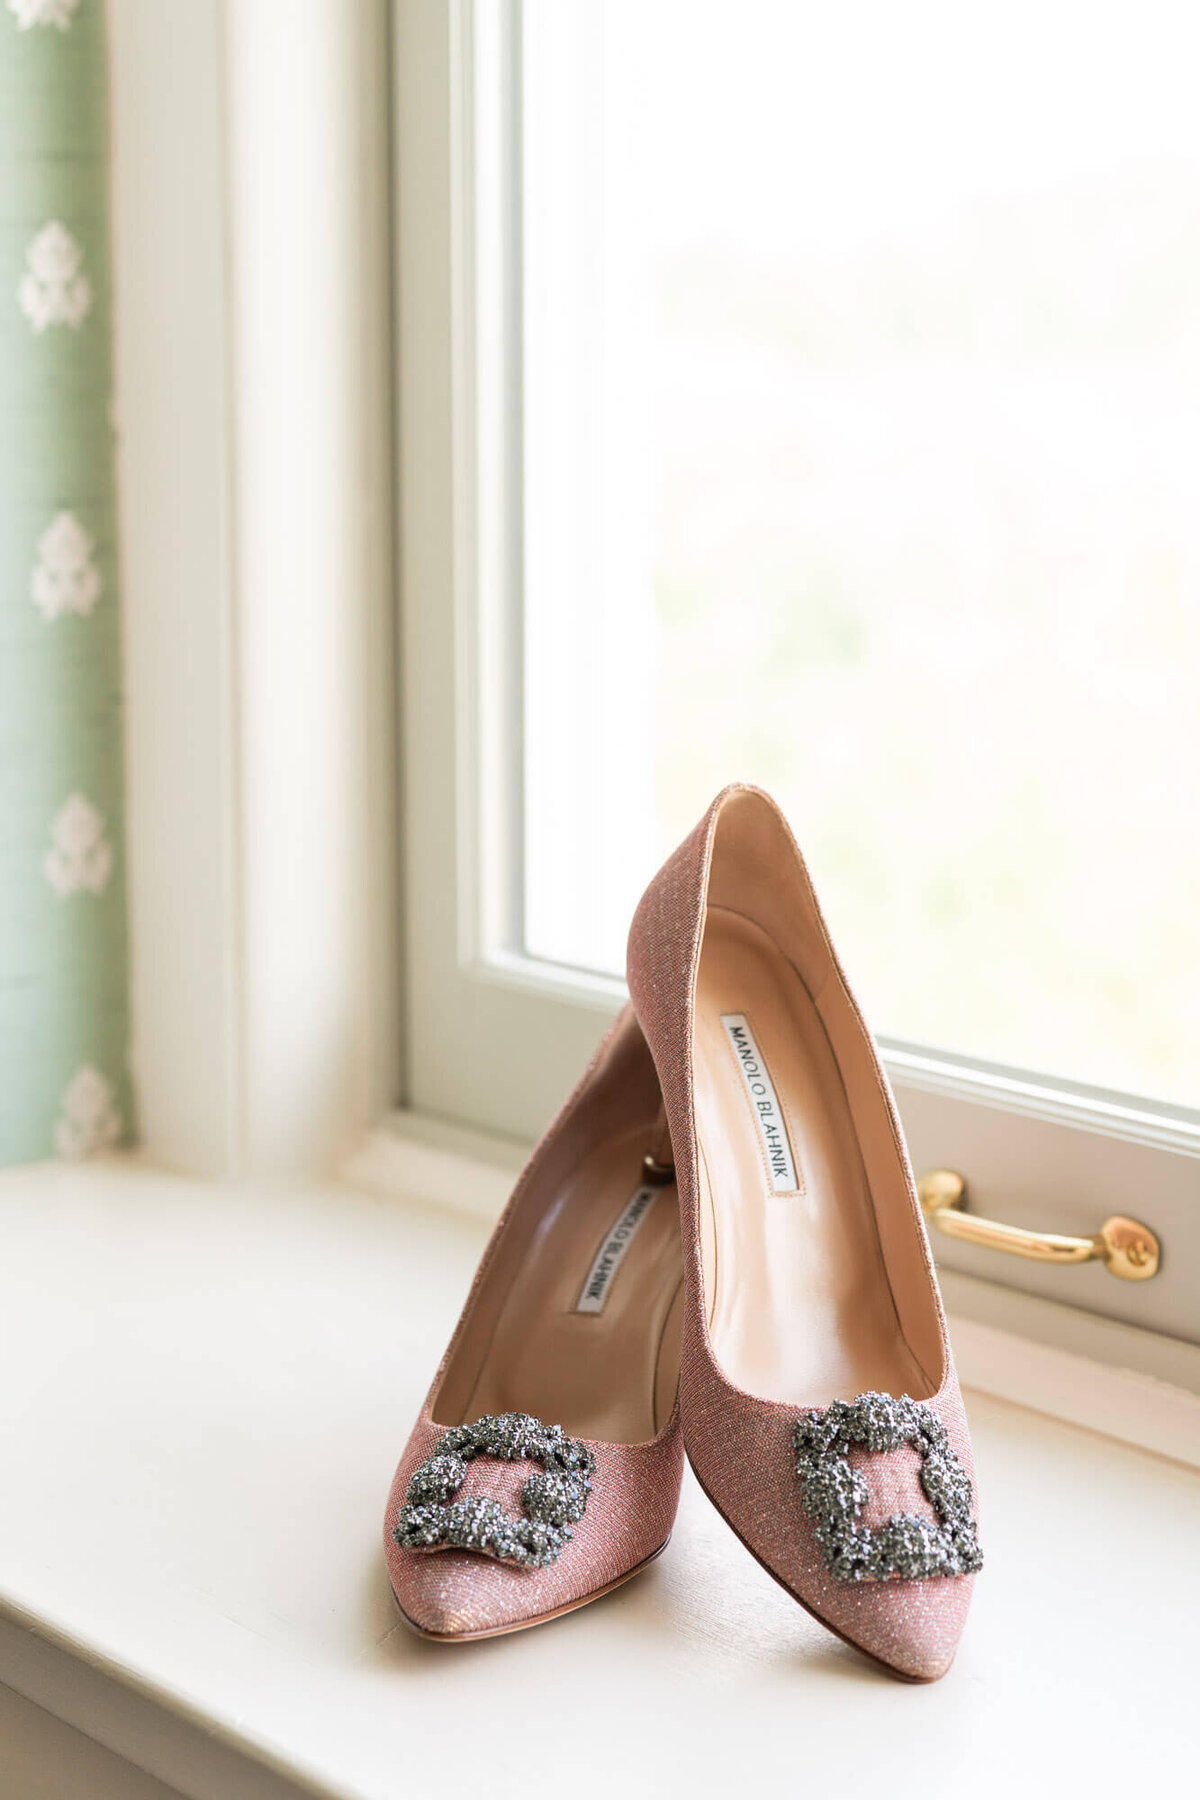 french-lick-west-baden-springs-wedding-manolo-blahnik-shoes